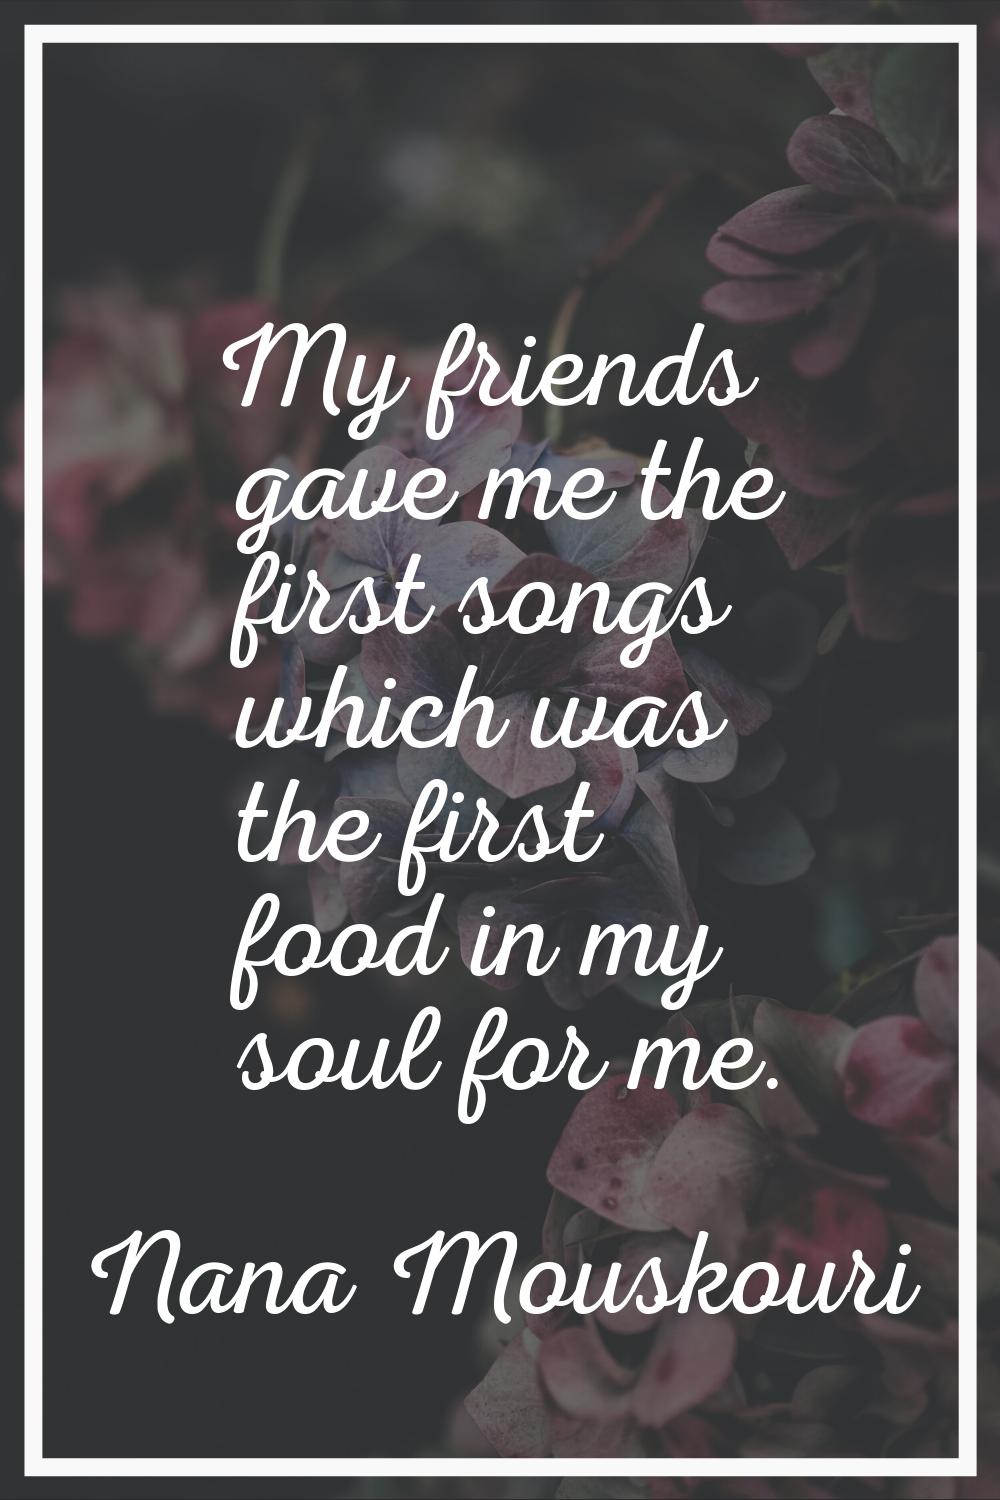 My friends gave me the first songs which was the first food in my soul for me.